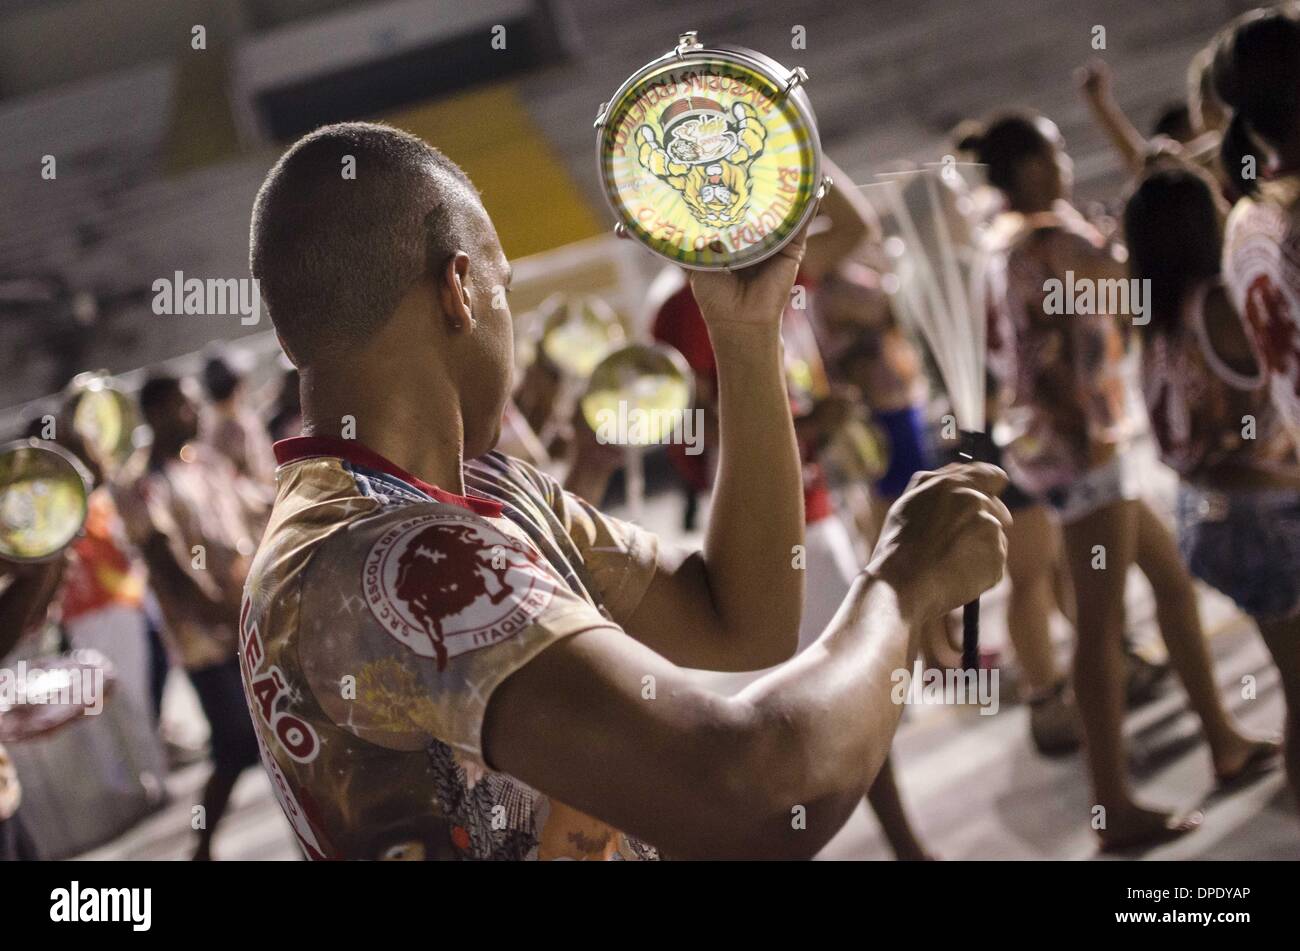 Sao Paulo, Brazil. 11th Jan, 2014. Members of ''Escola de Samba Leandro the Itaquera'' drums rehearse at Sao Paulo's ''sambodromo'' this saturday - 11/01/2014. The drums is the heart of samba, and found by many people the most important piece of details evaluated by the judges along the carnival parade © Gustavo Basso/NurPhoto/ZUMAPRESS.com/Alamy Live News Stock Photo